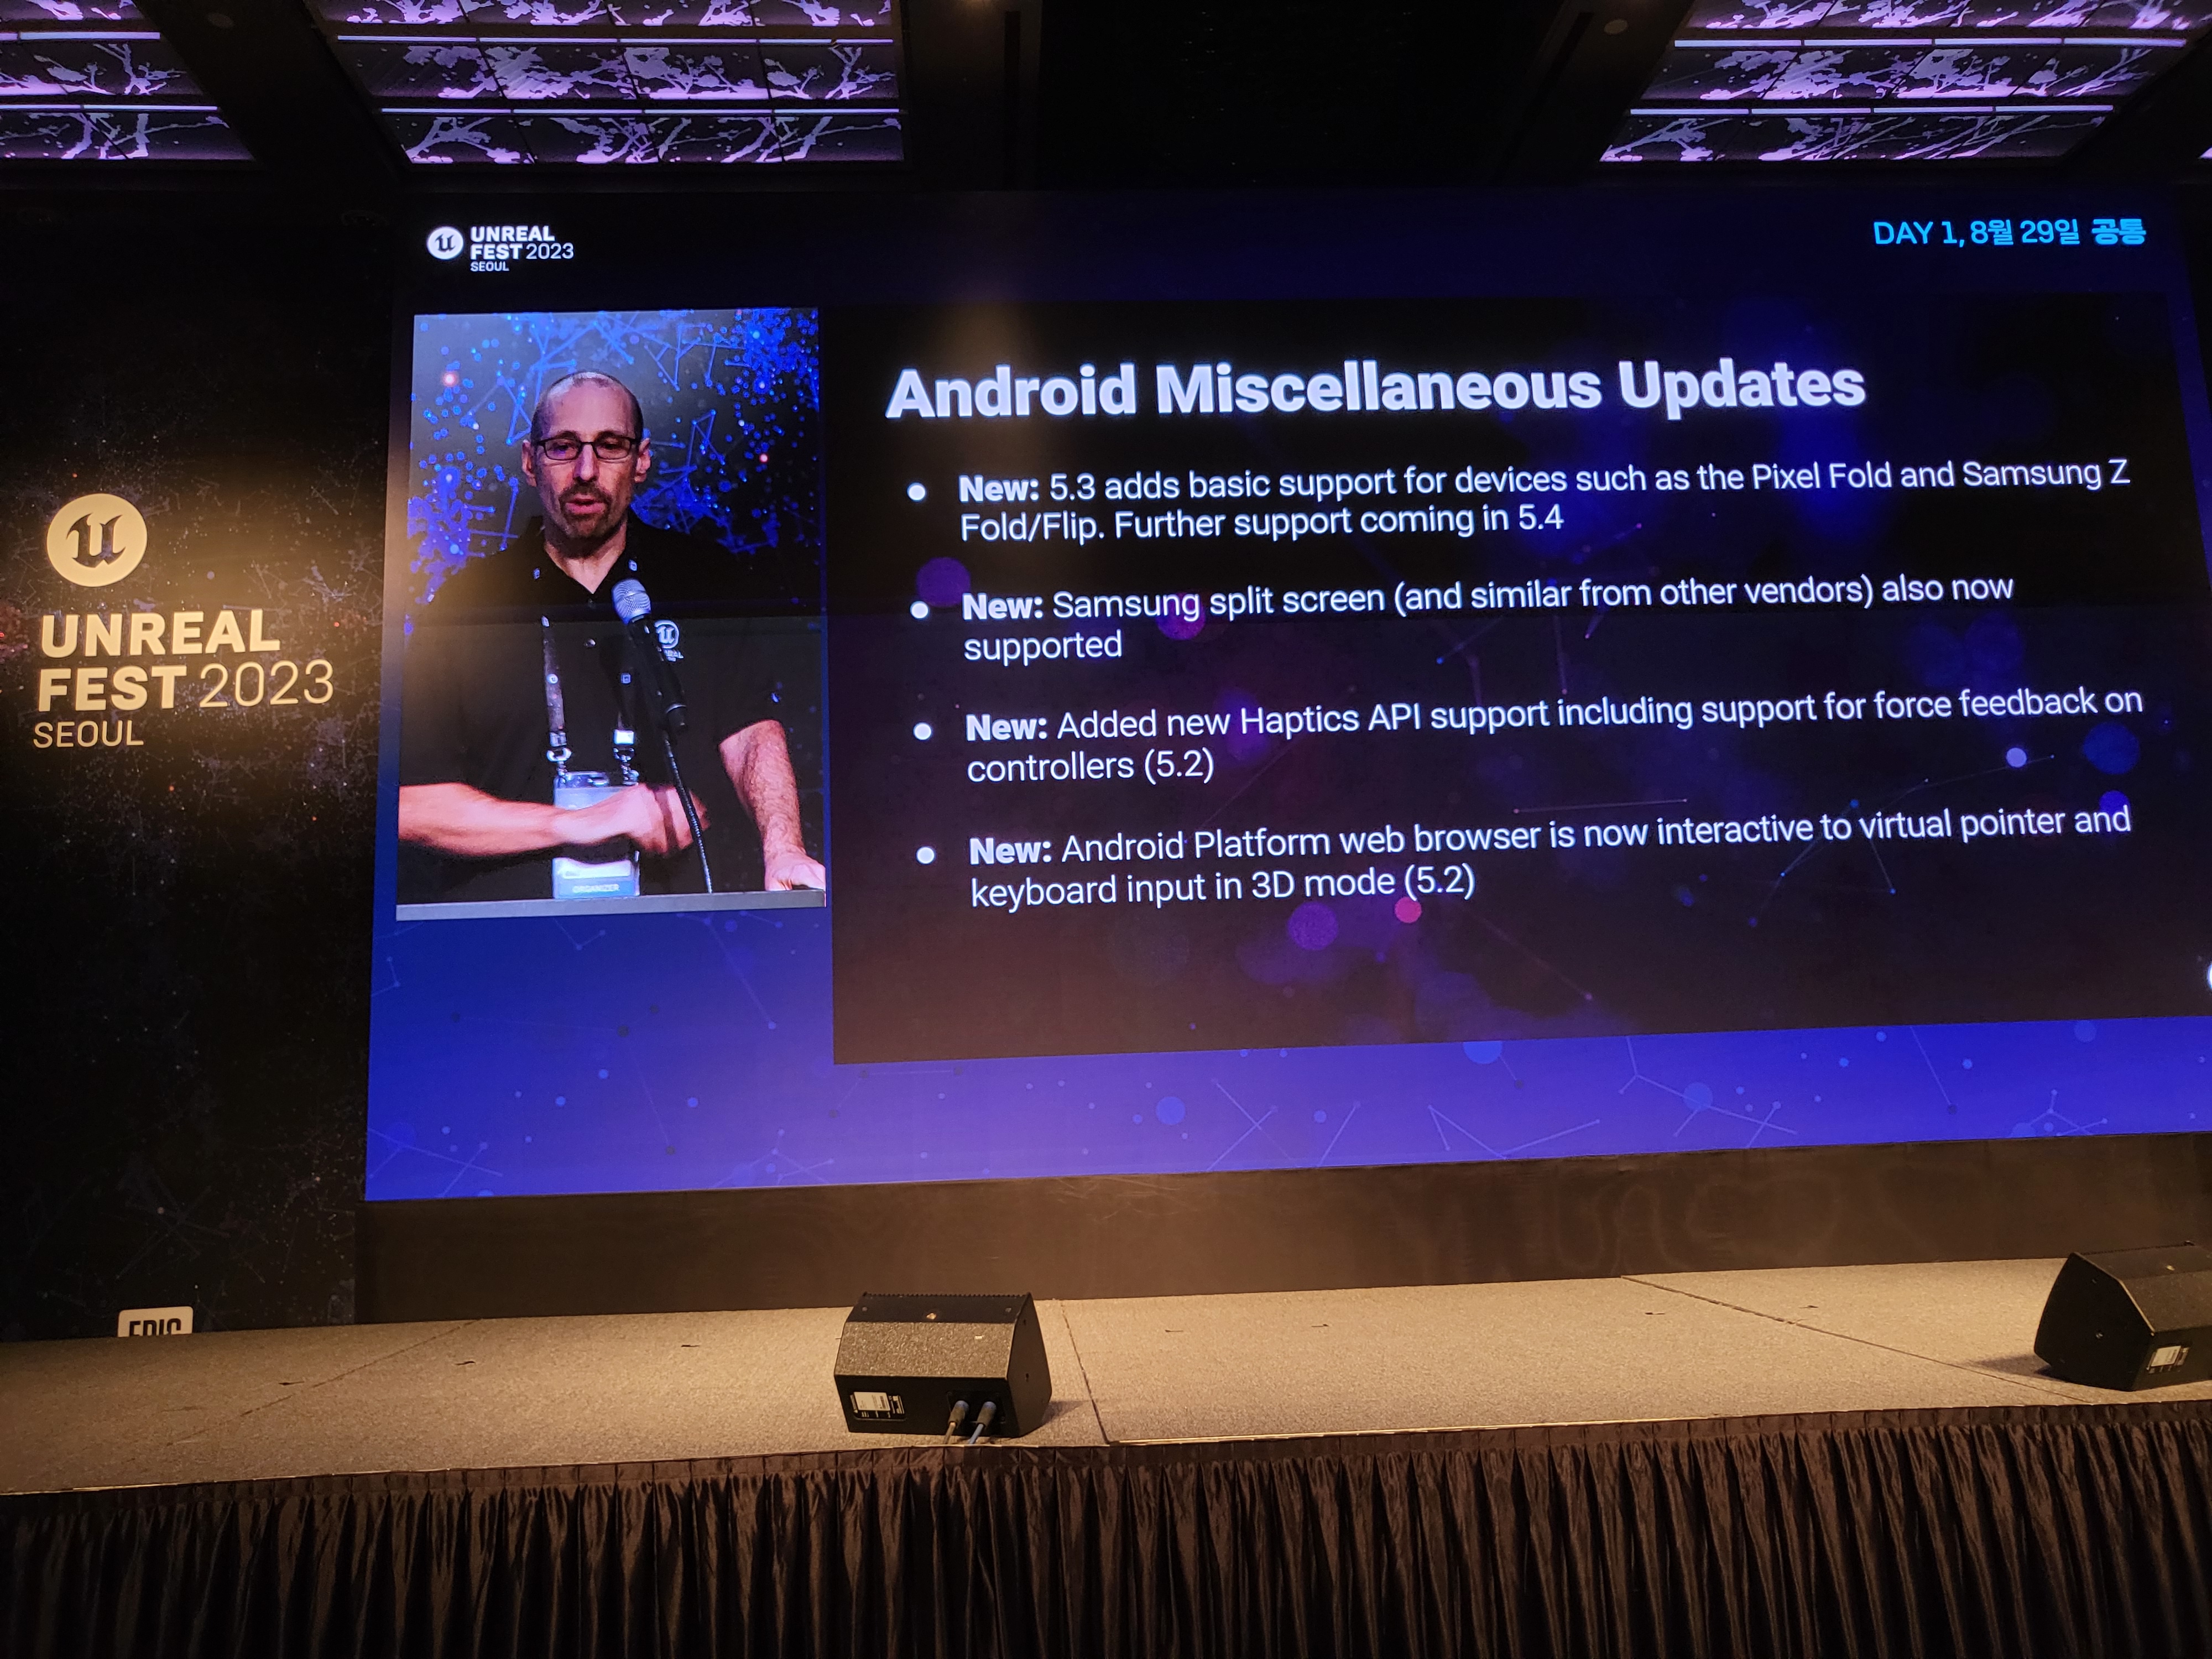 Android Miscellaneous Updates